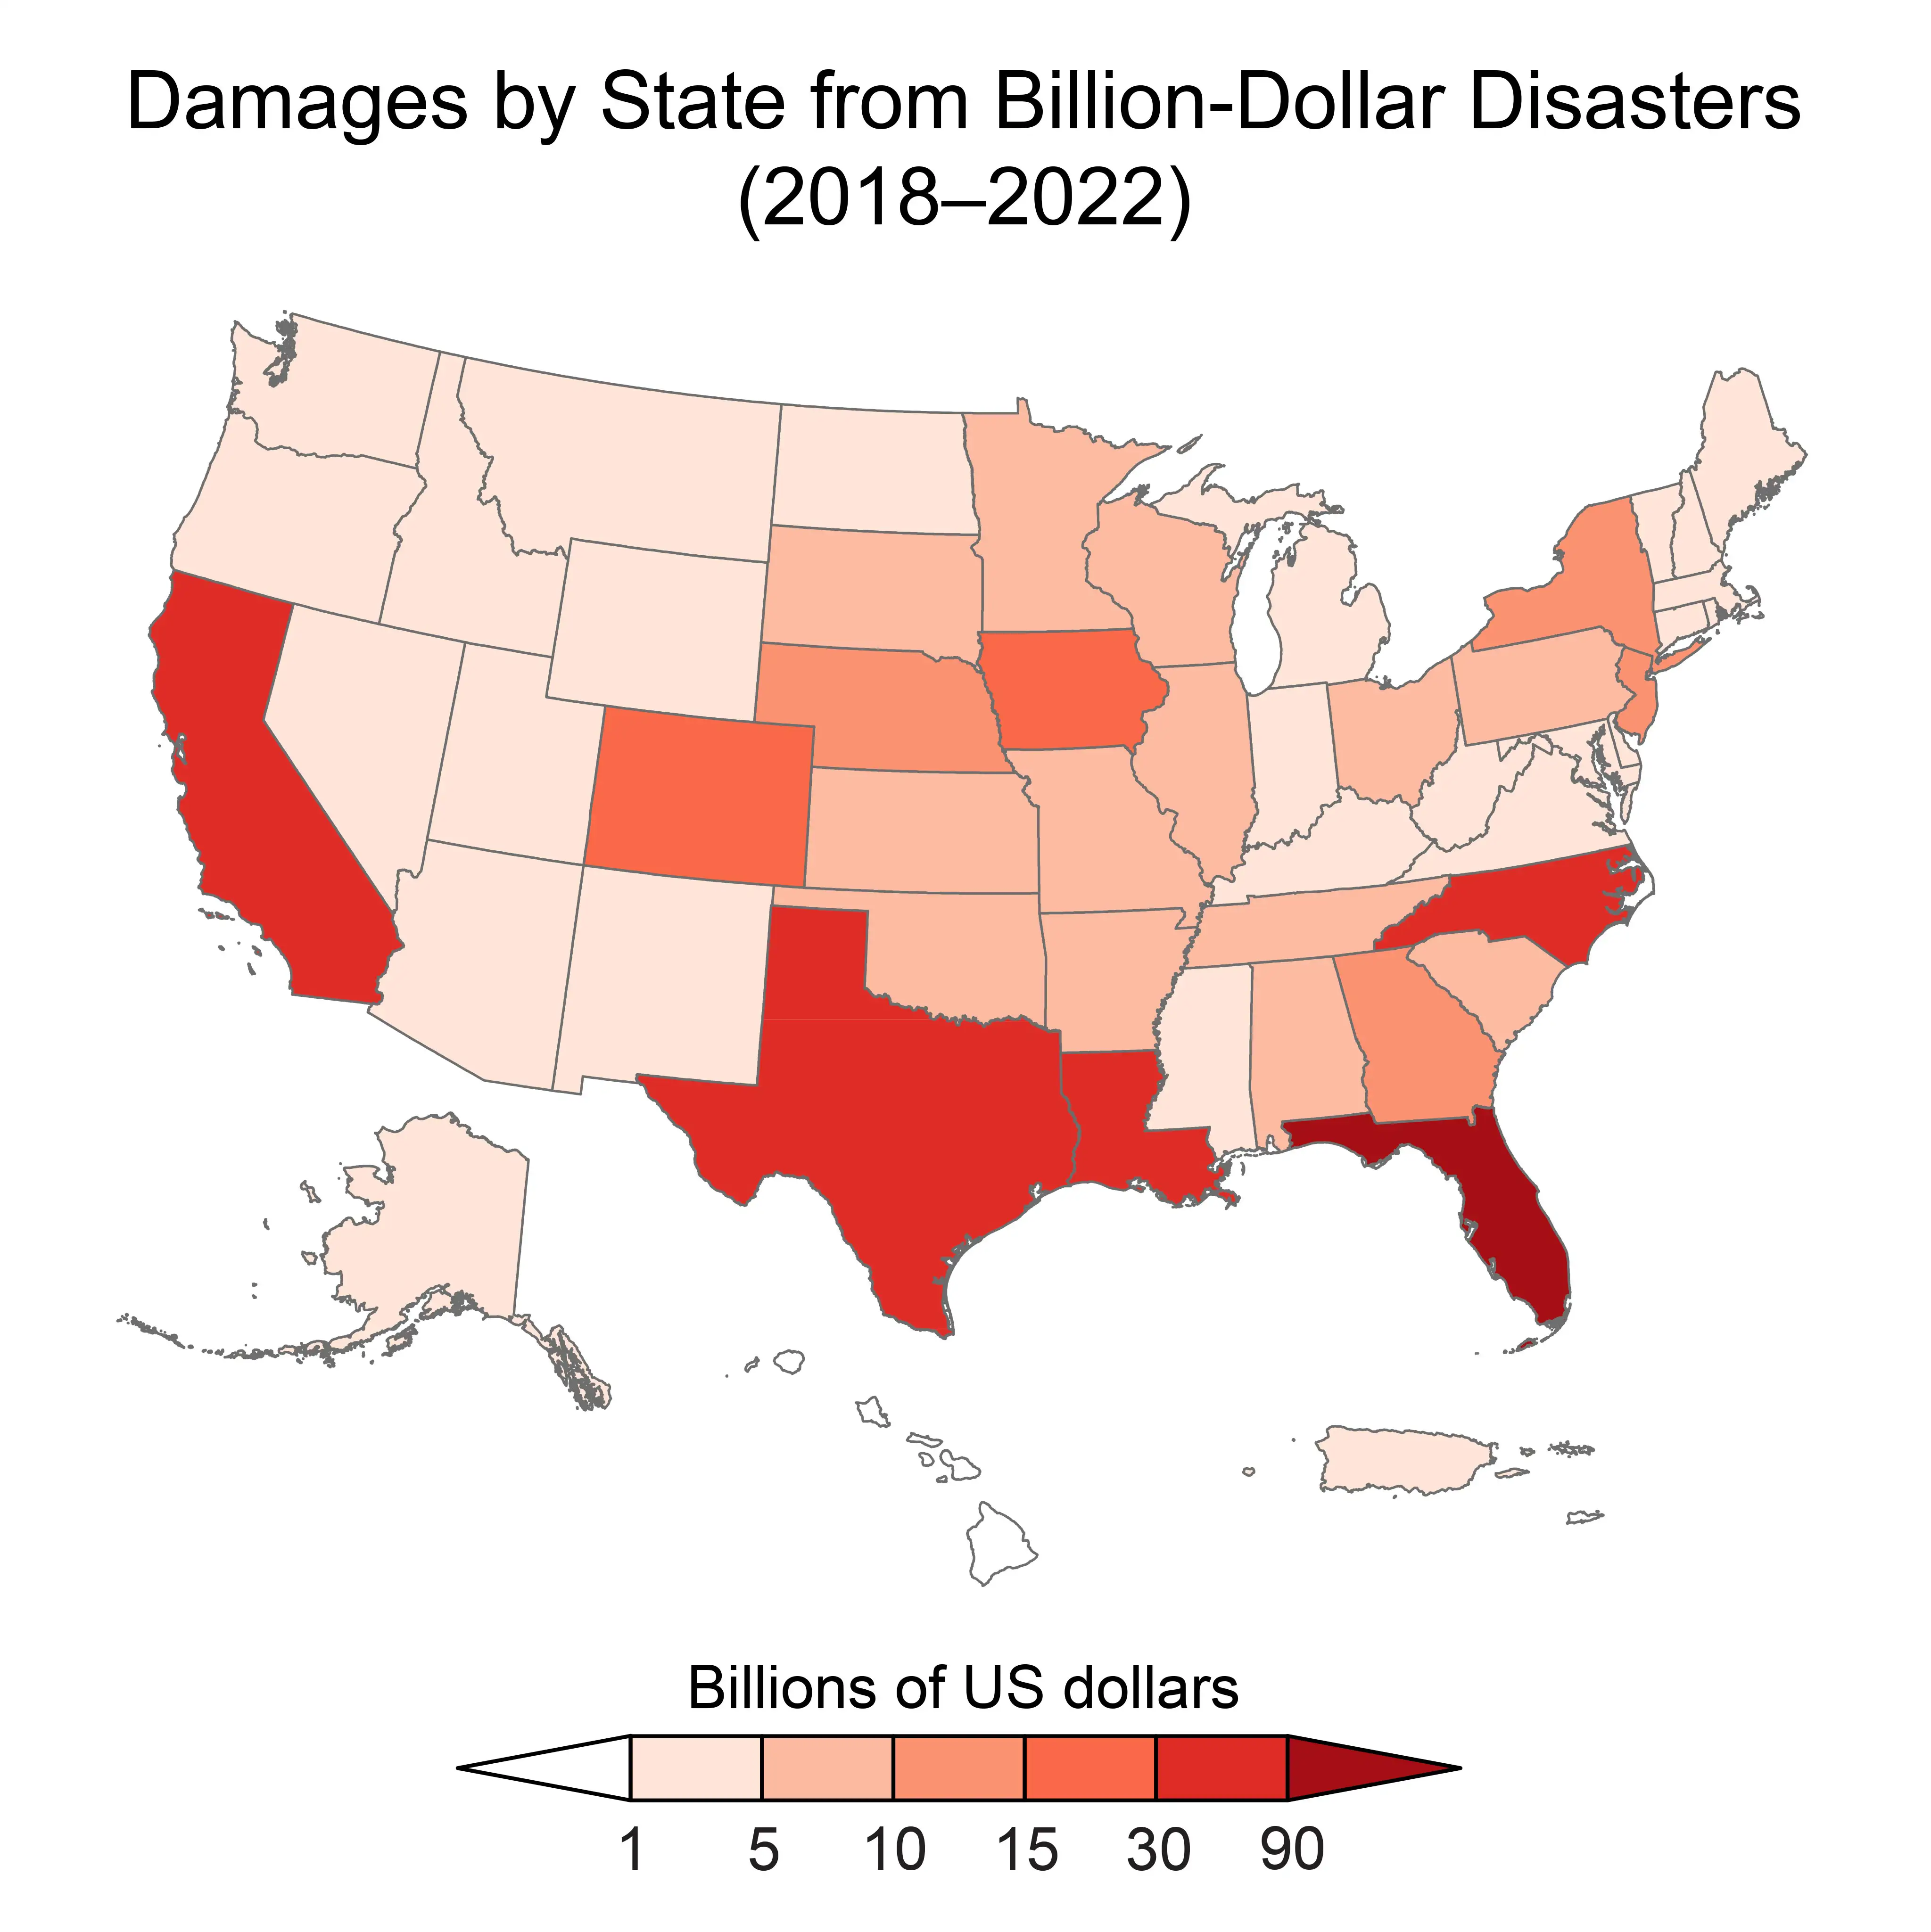 Damages by State from Billion-Dollar Disasters (2018-2022)